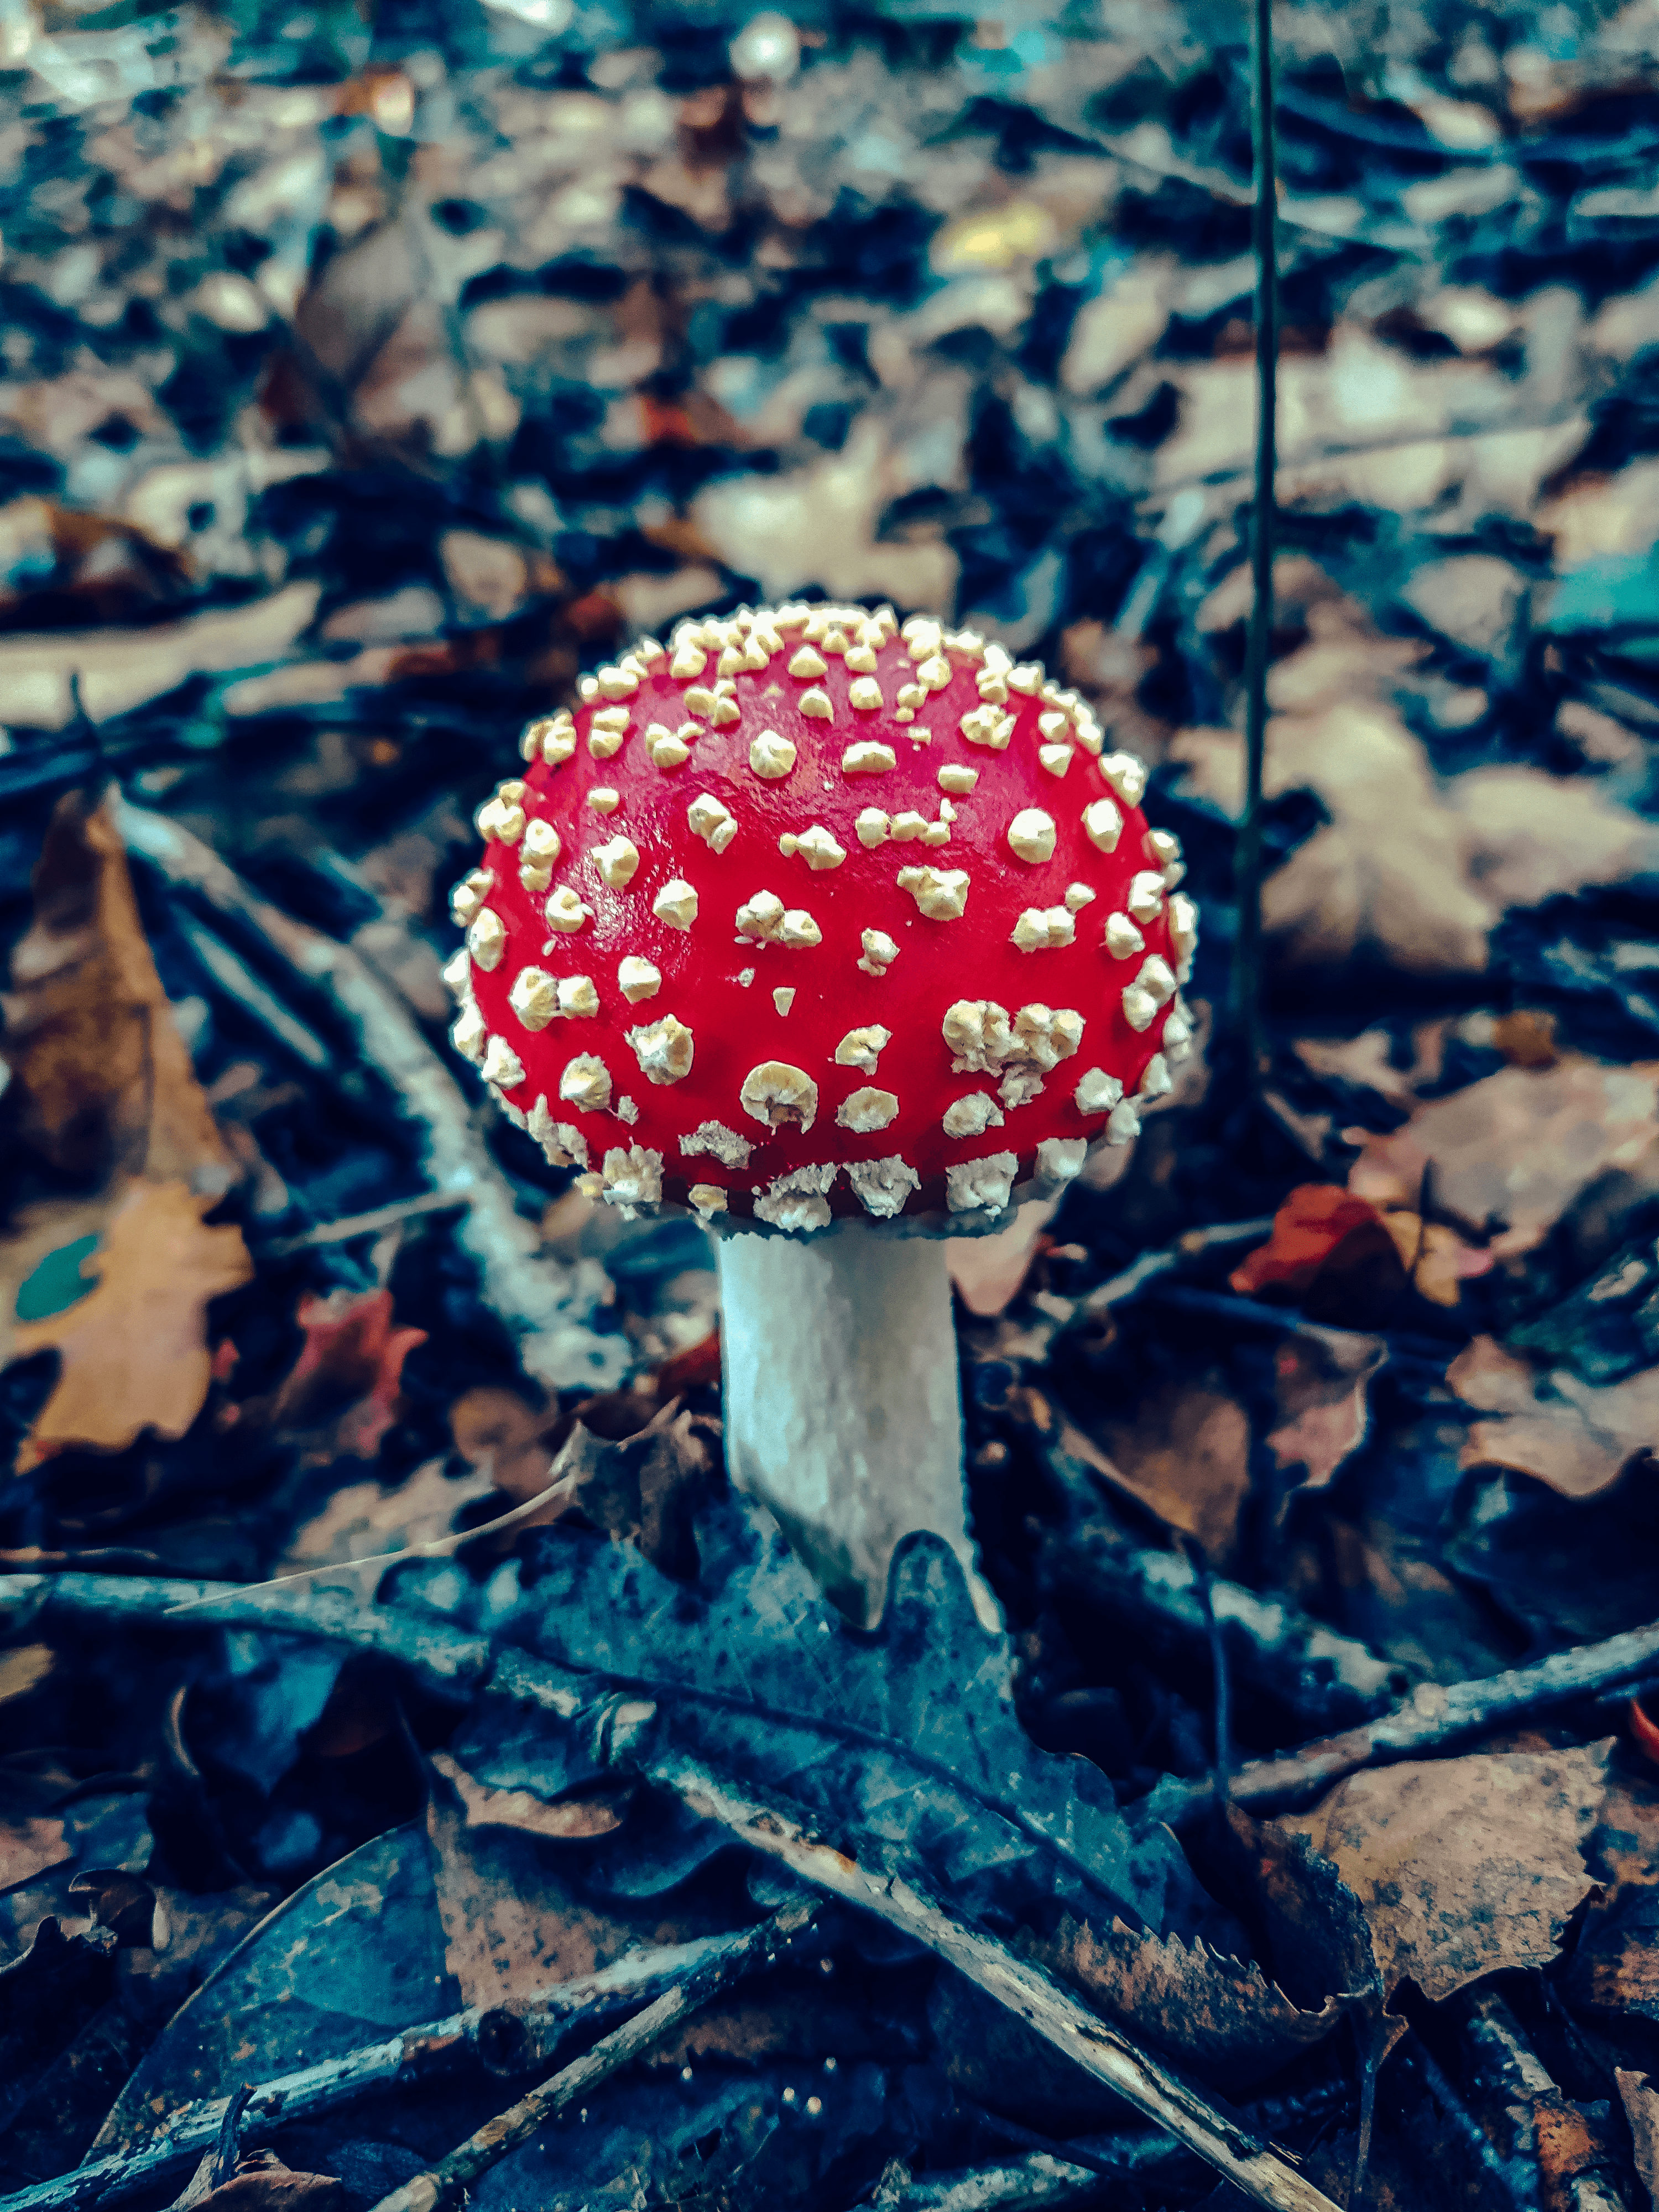 Mushrooms in the forest by Mike.S